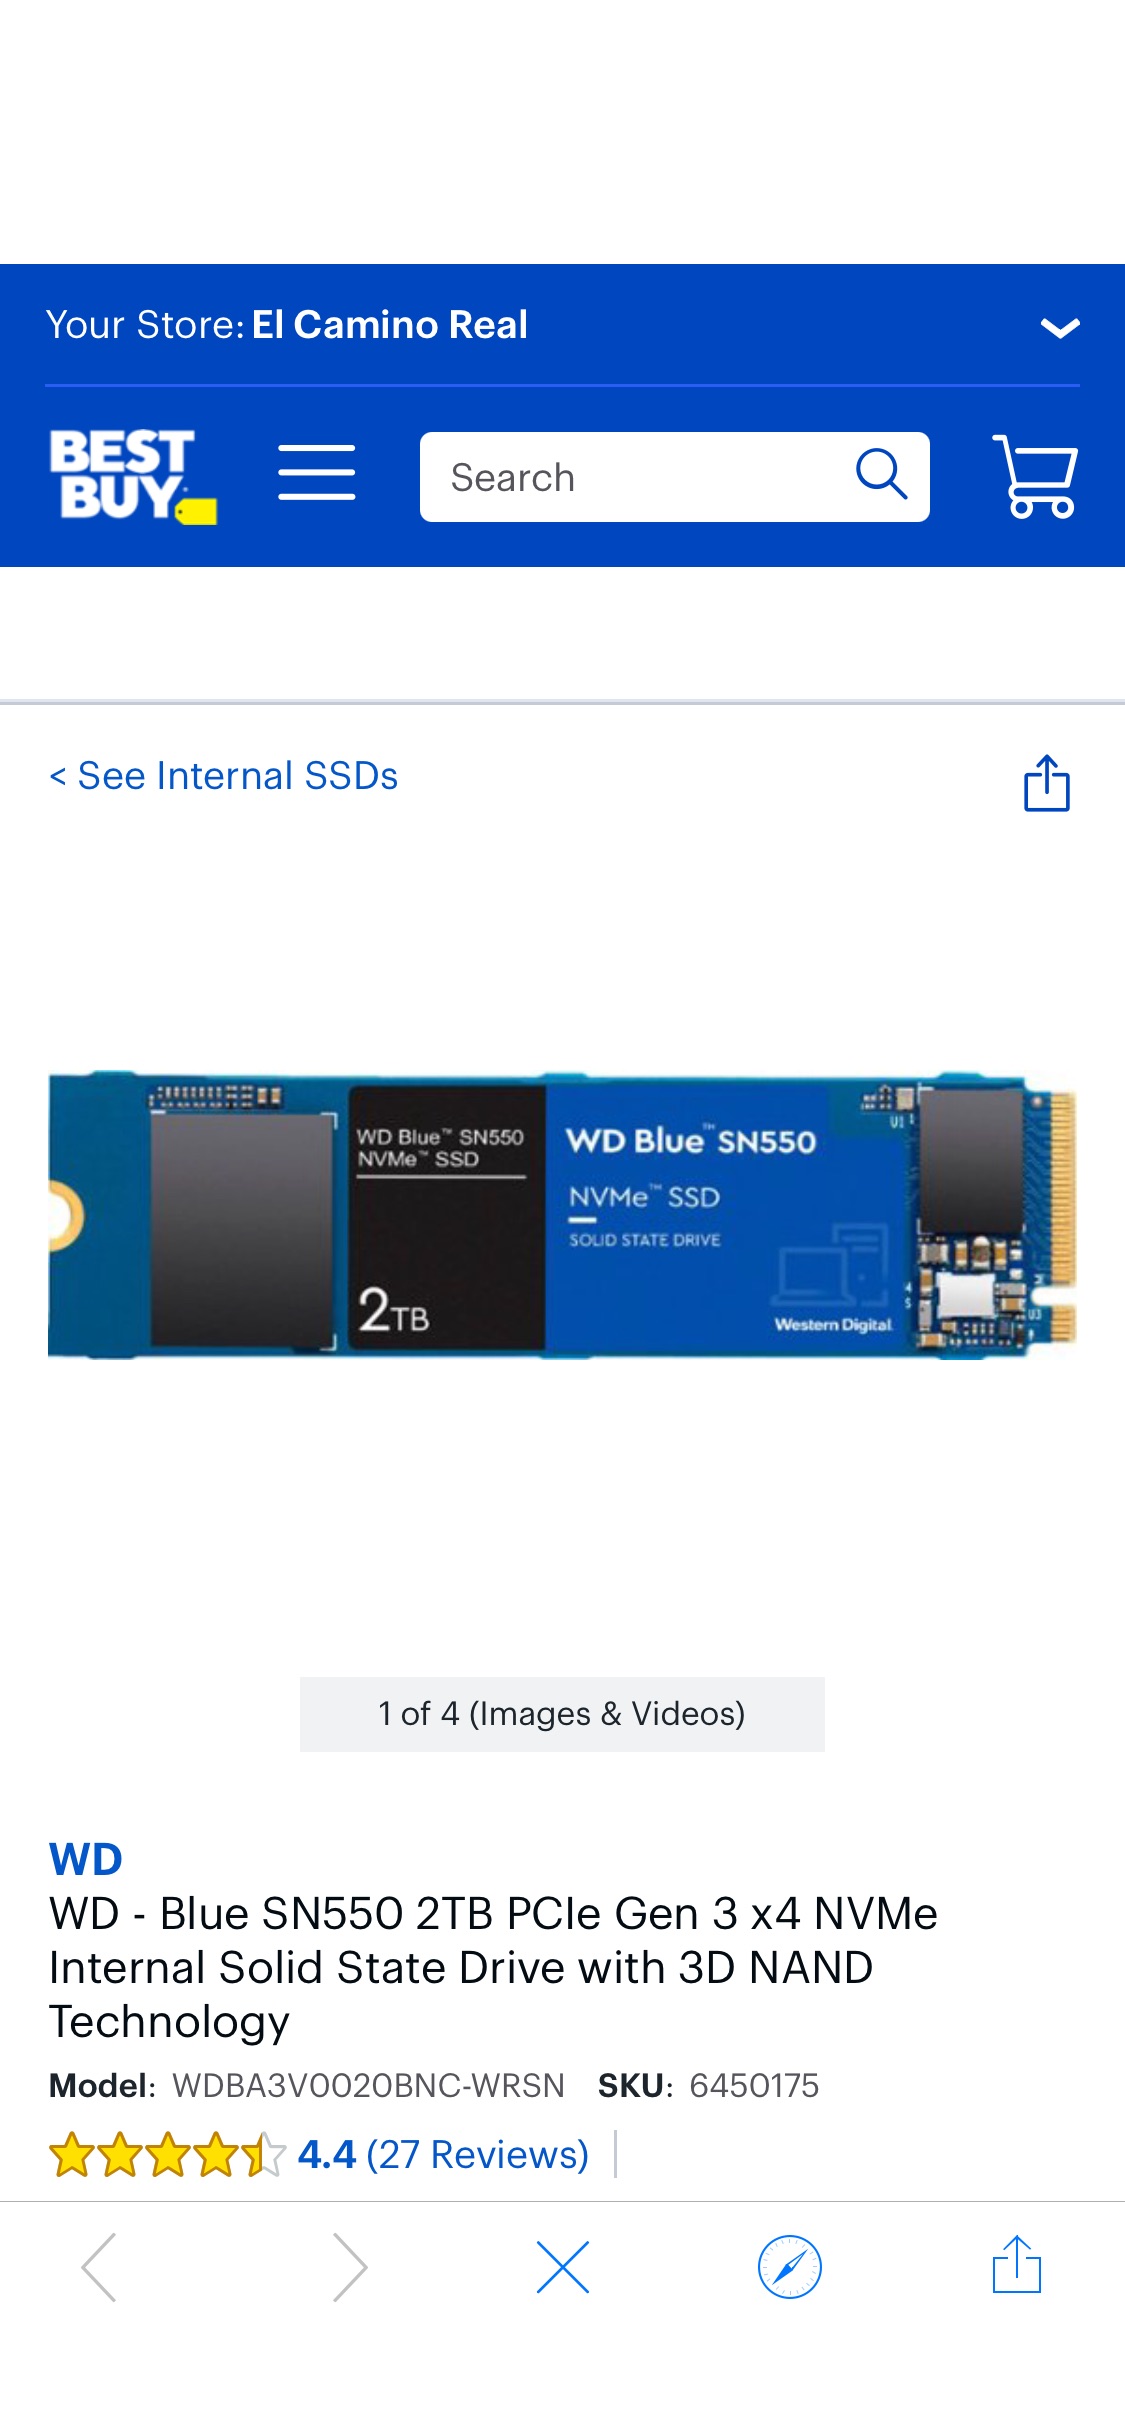 WD Blue SN550 2TB PCIe Gen 3 x4 NVMe Internal Solid State Drive with 3D NAND Technology WDBA3V0020BNC-WRSN - Best Buy为